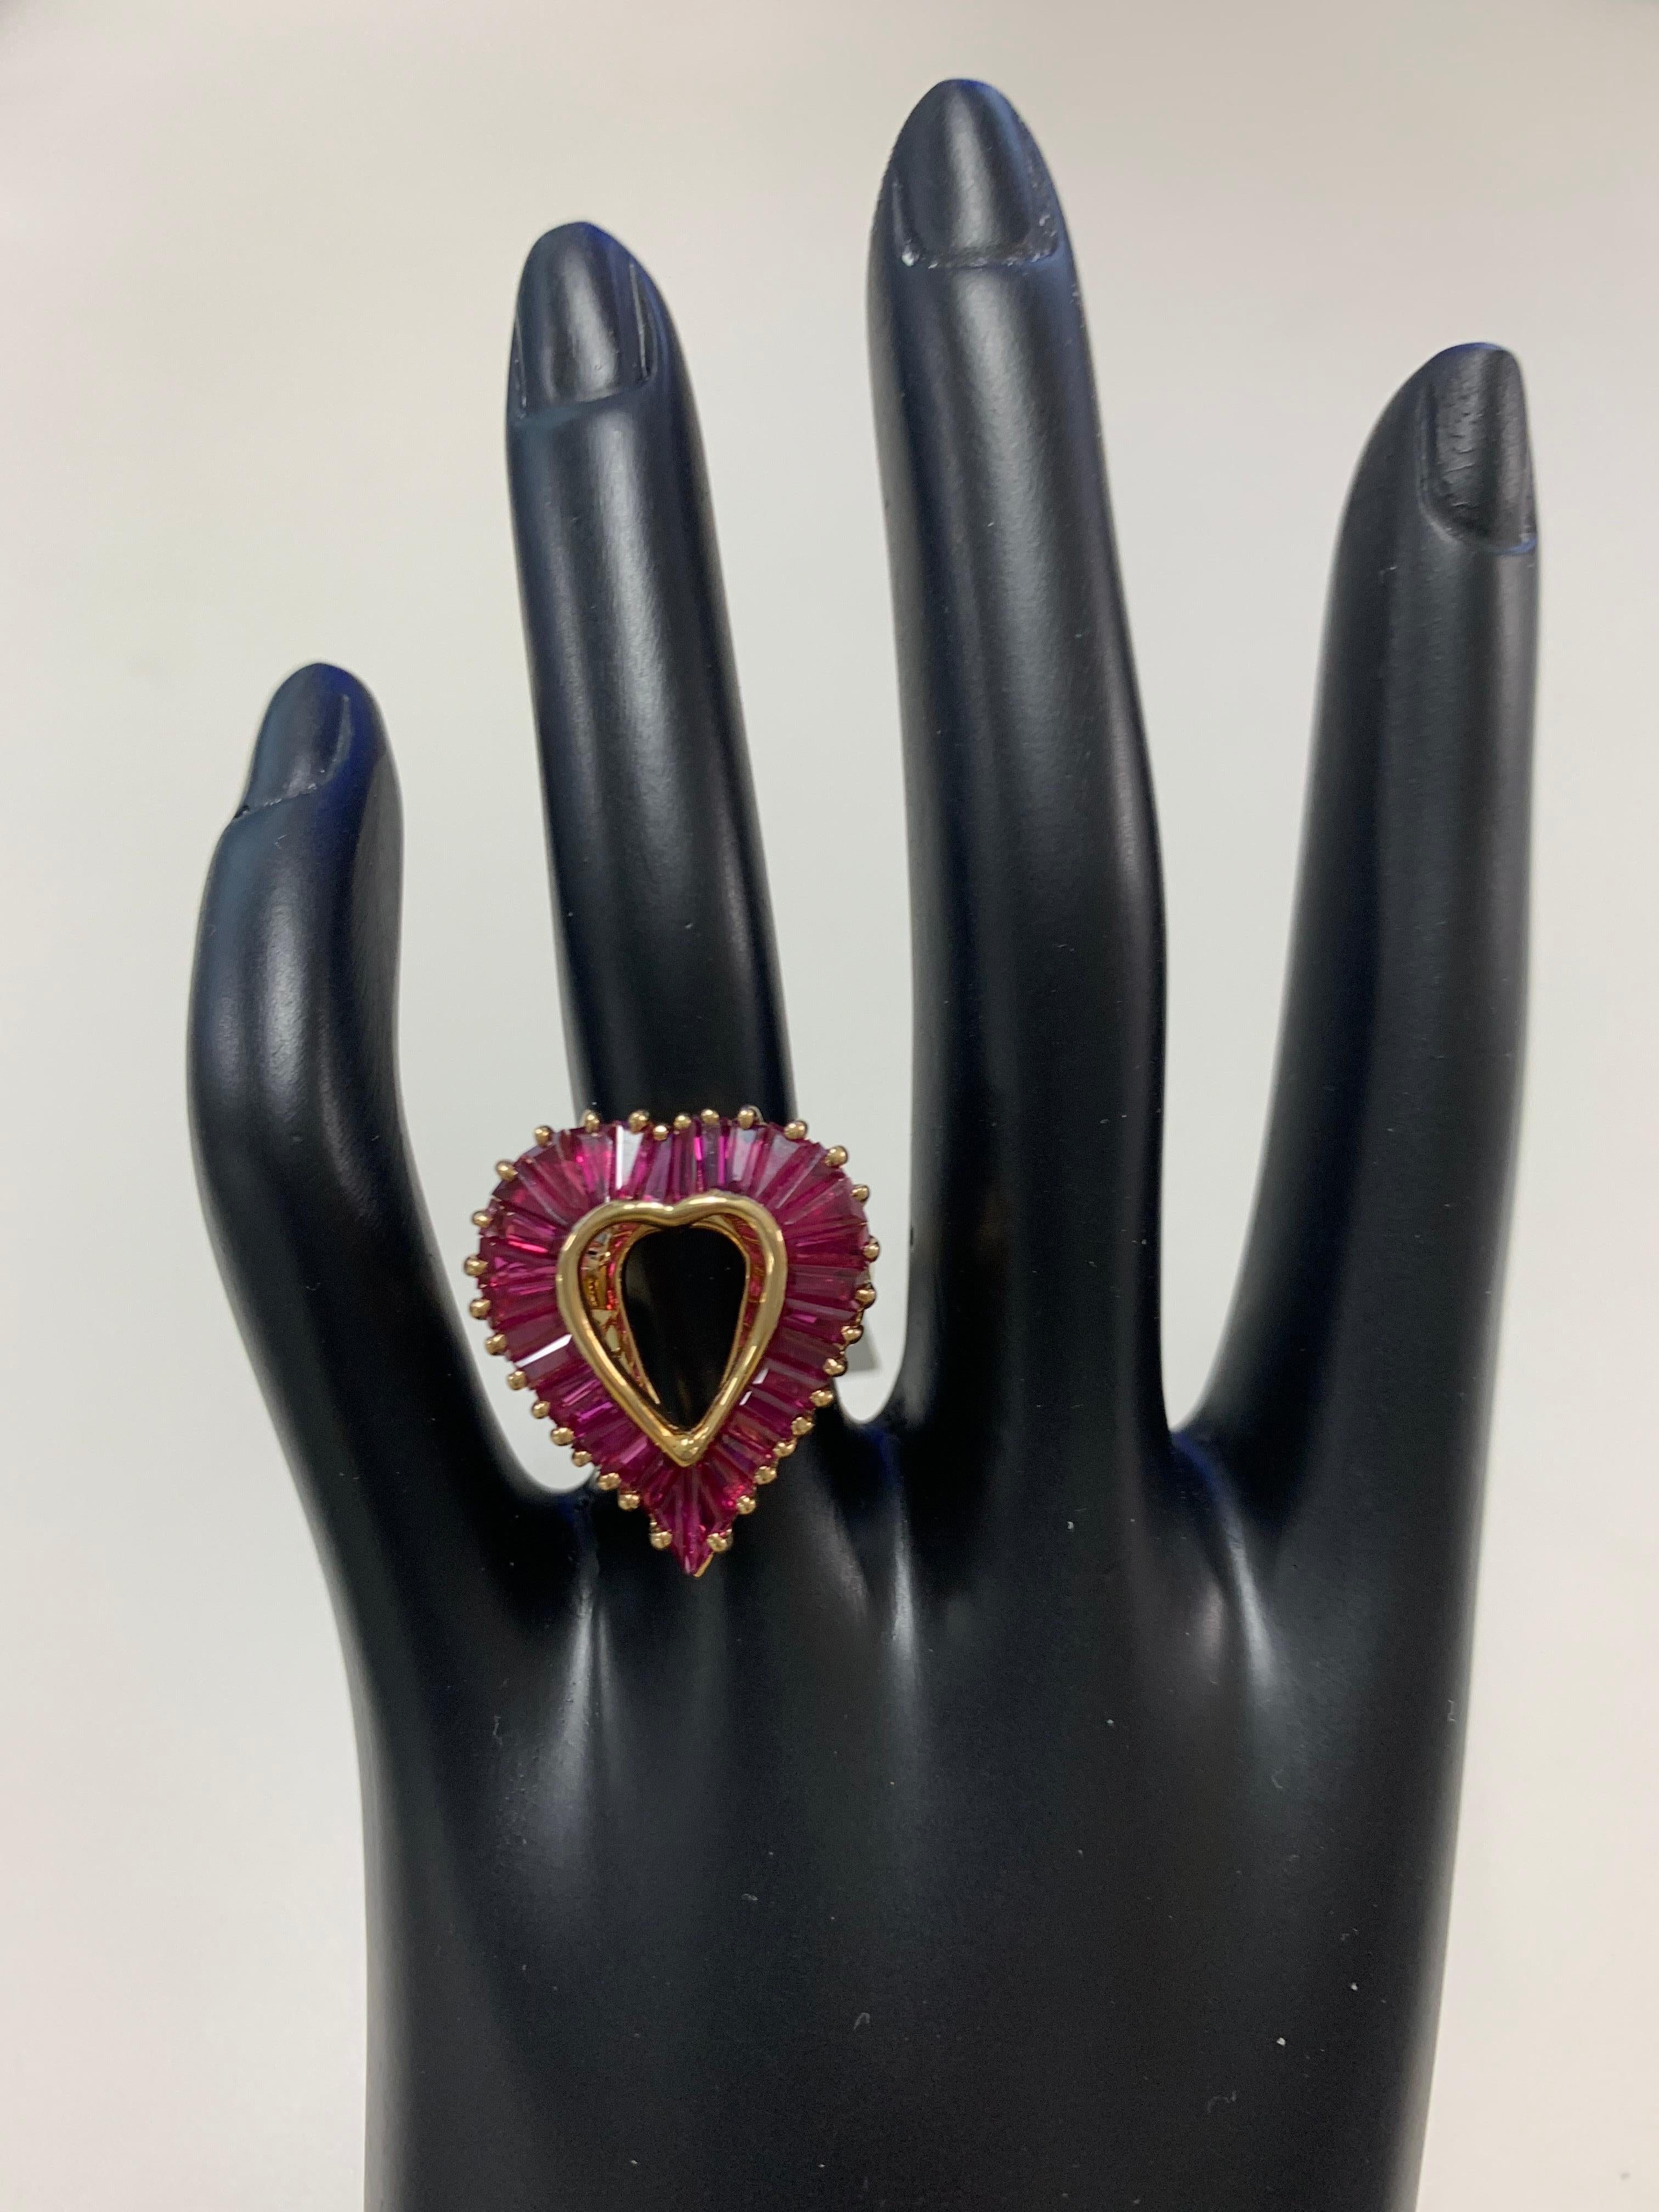 Oscar Heyman 18k yellow gold ring contains 31 baguette rubies (4.05tcw) set in the 'ballerina' style. It is stamped with the makers mark, 18K, and serial number 302795.

Size 6. Can be sized at no charge between a 5 - 7. No refunds on re-sized